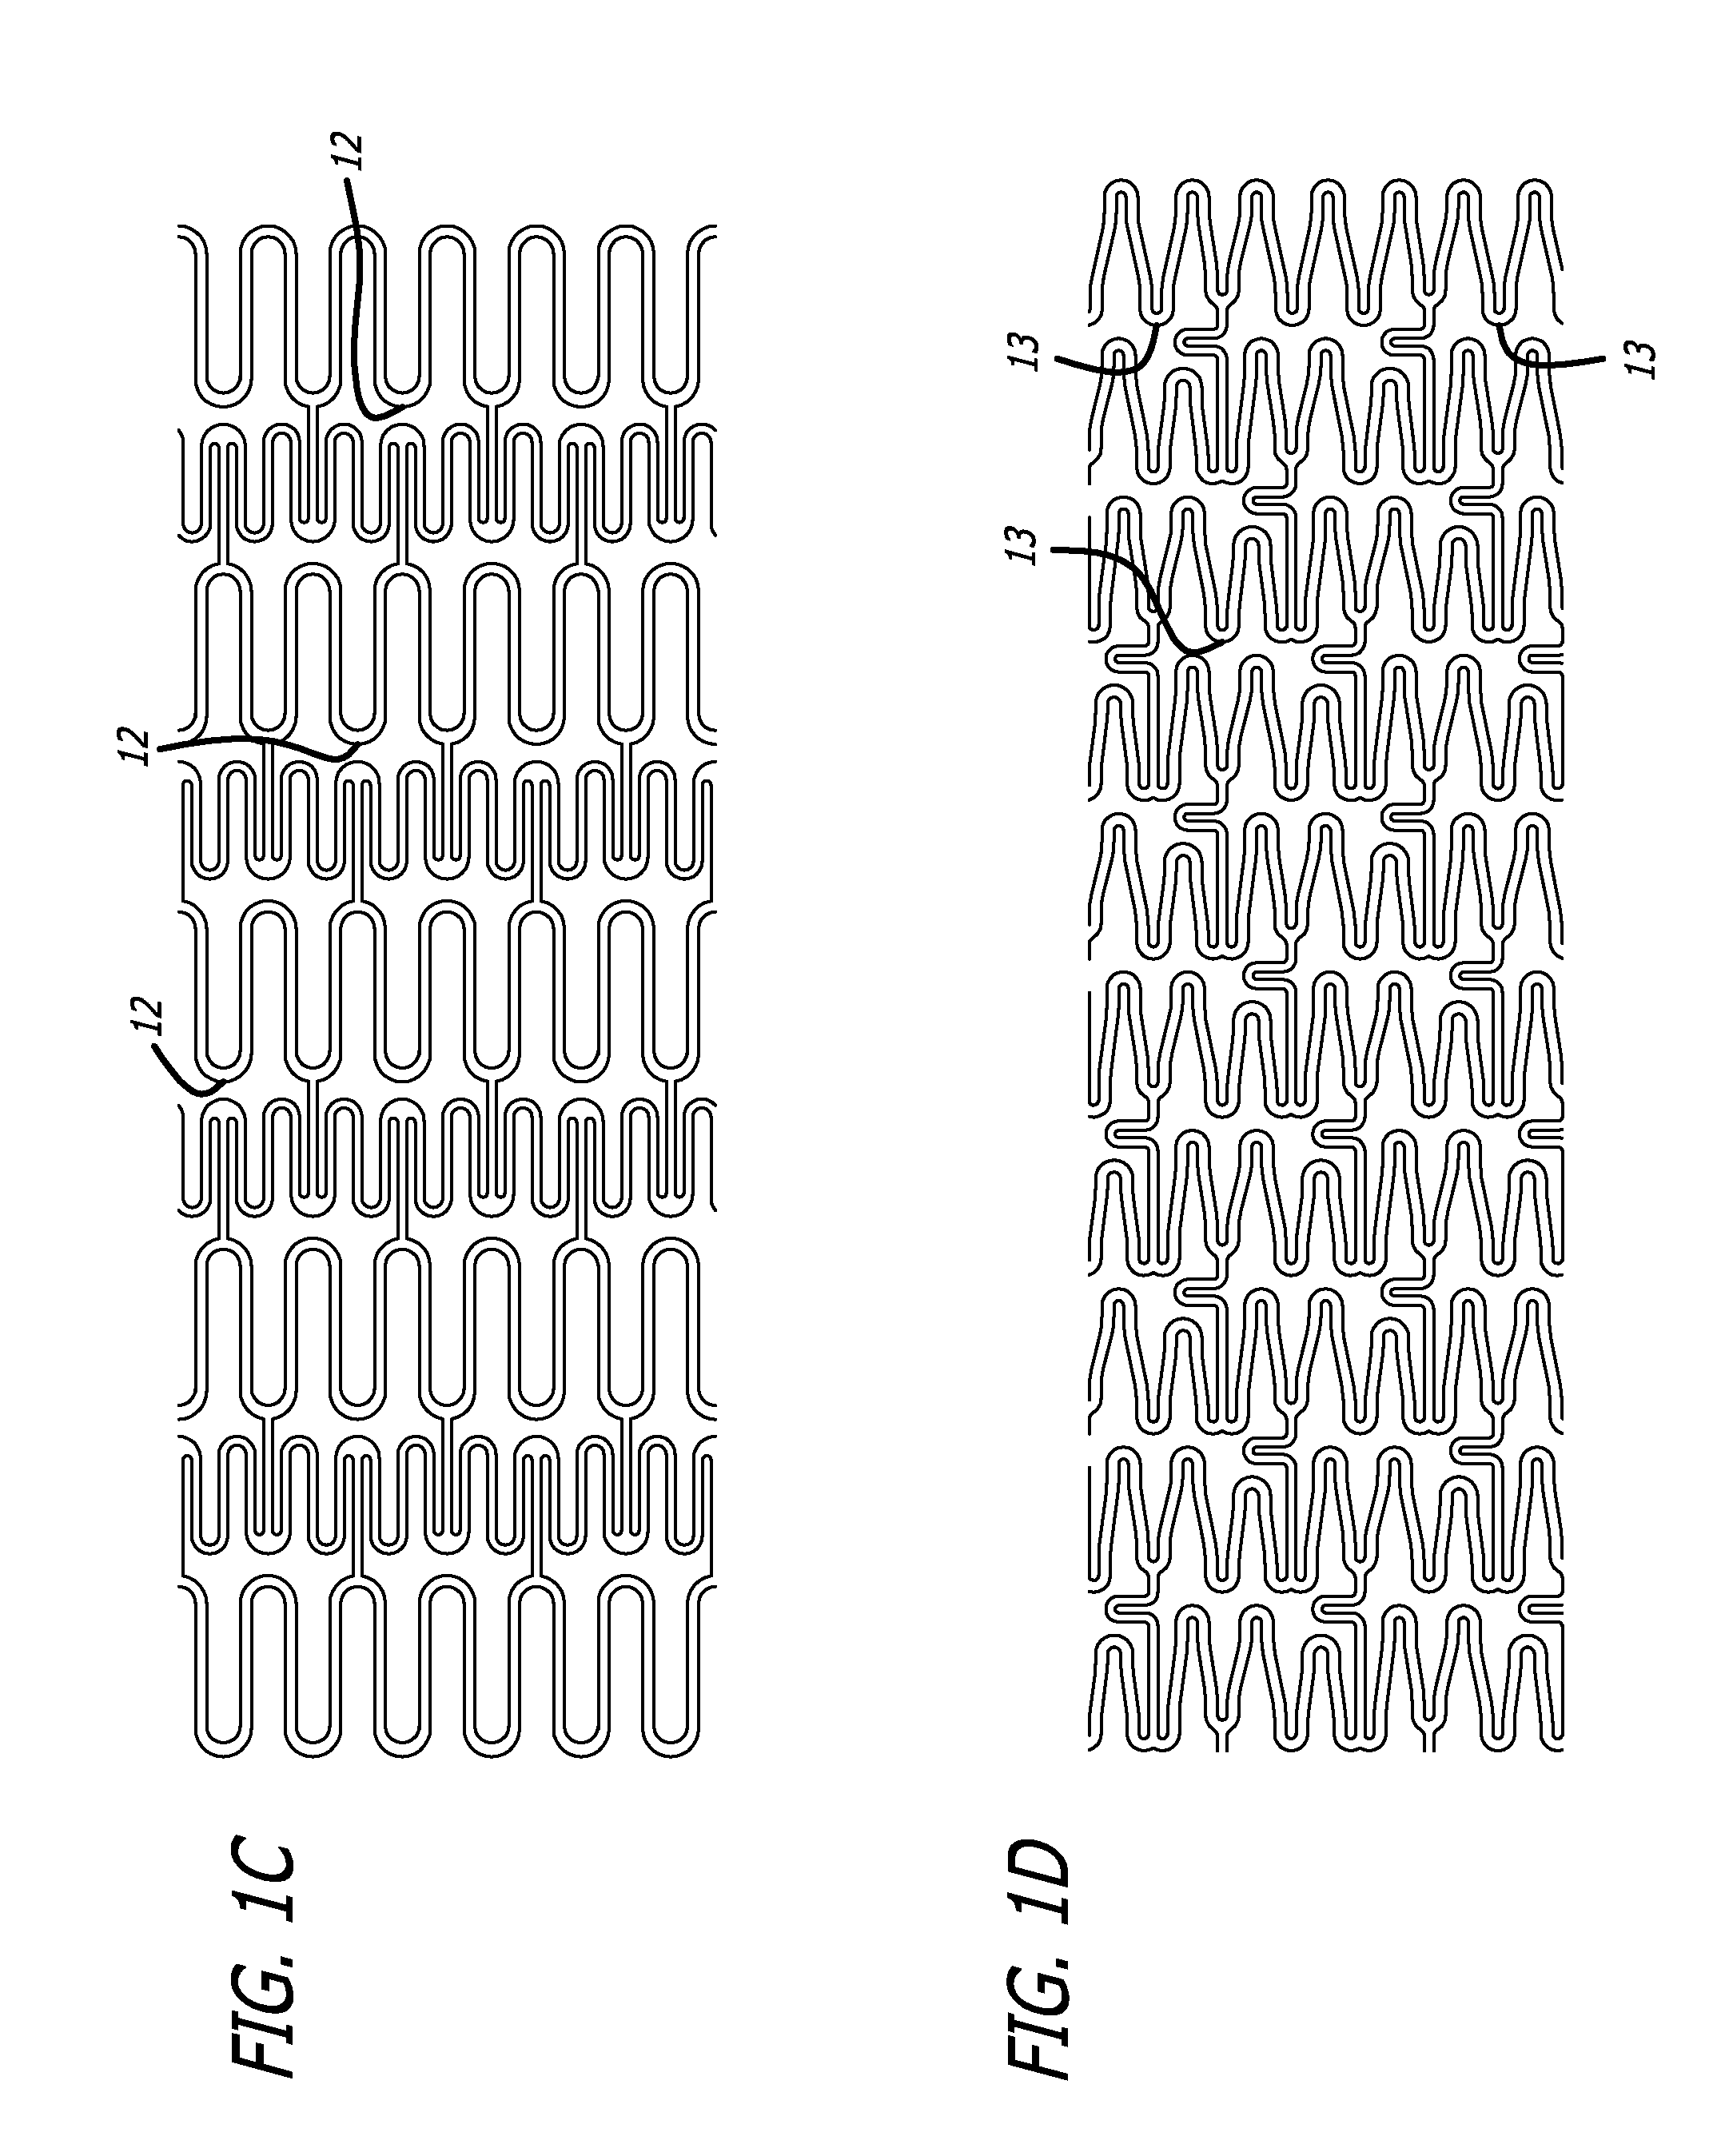 Slotted Self-Expanding Stent Delivery System